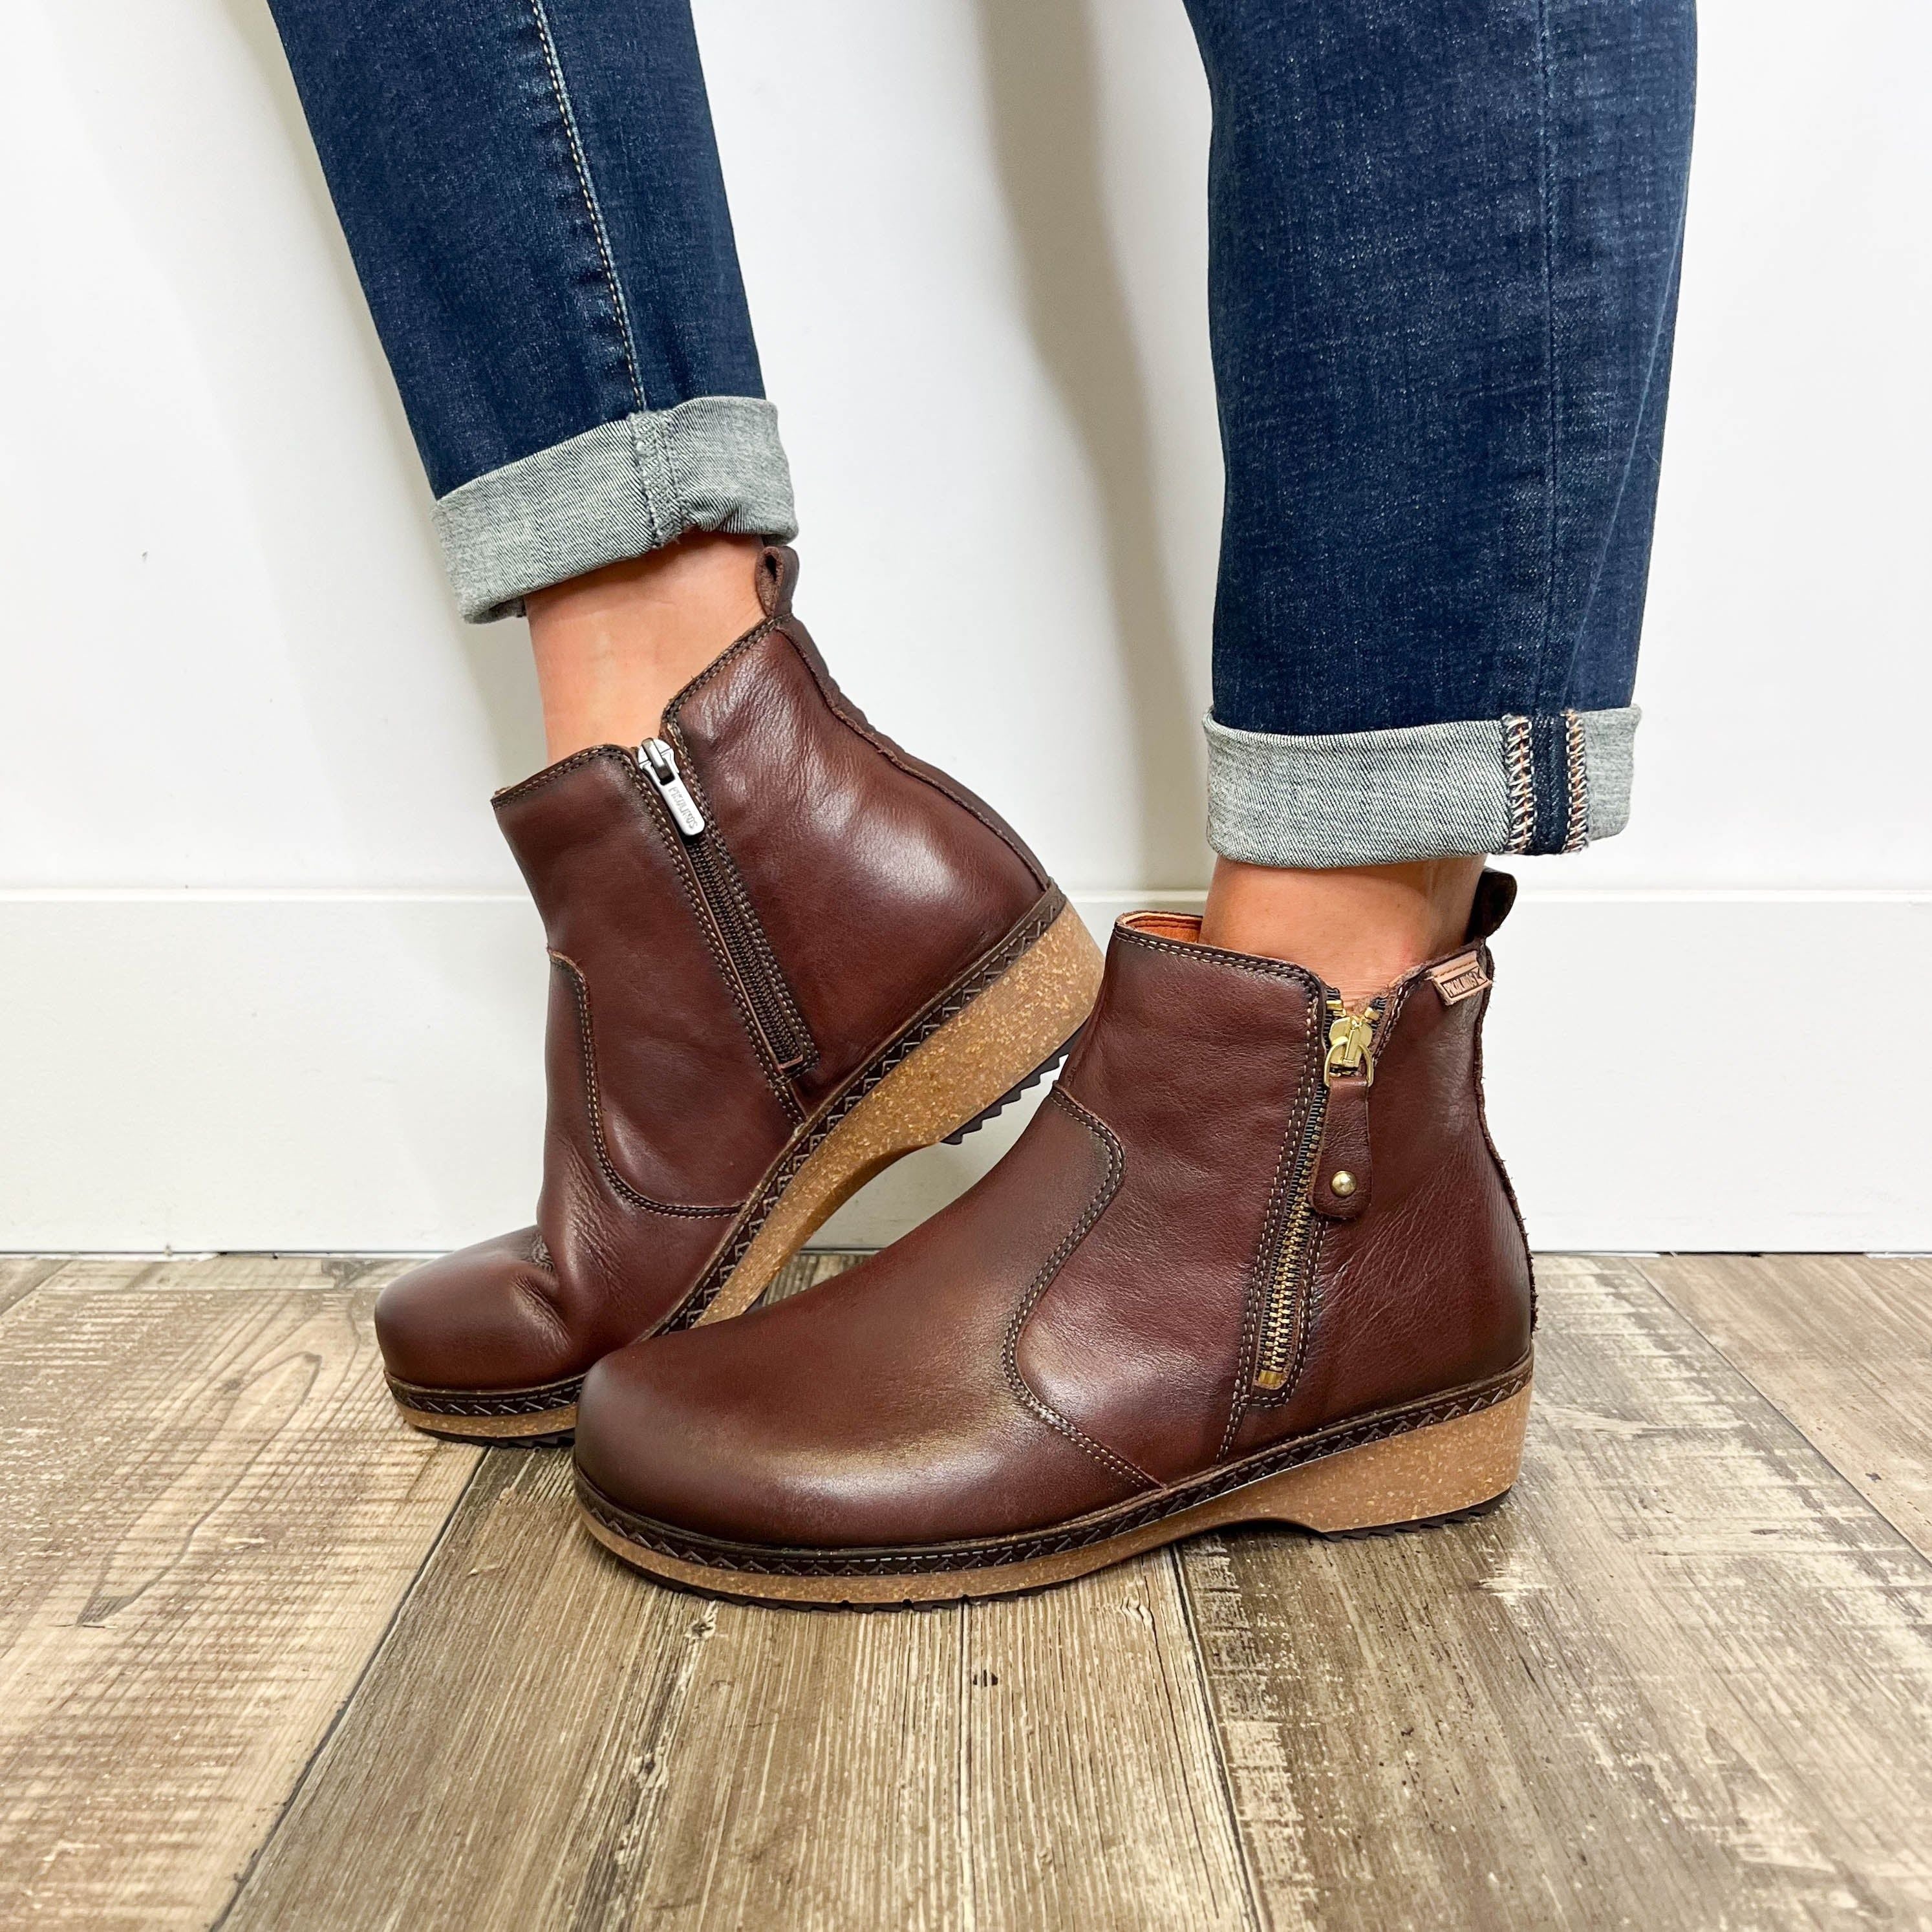 The Granada Women's Comfortable Leather Ankle Boots